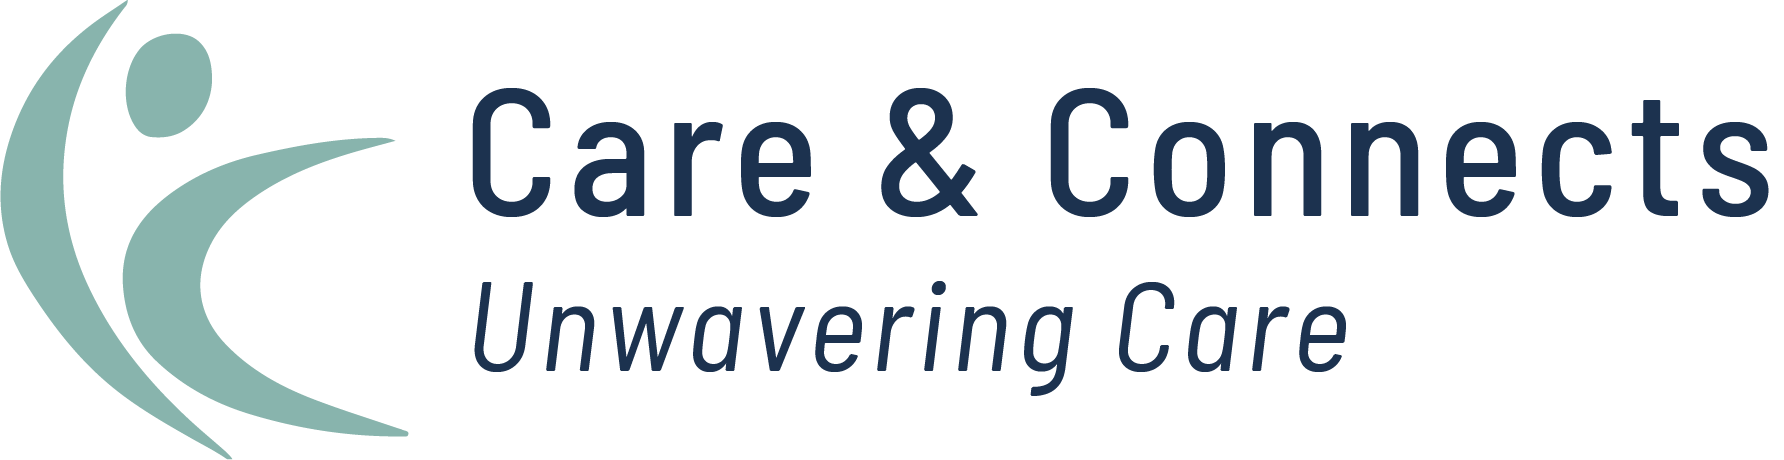 Care & Connects